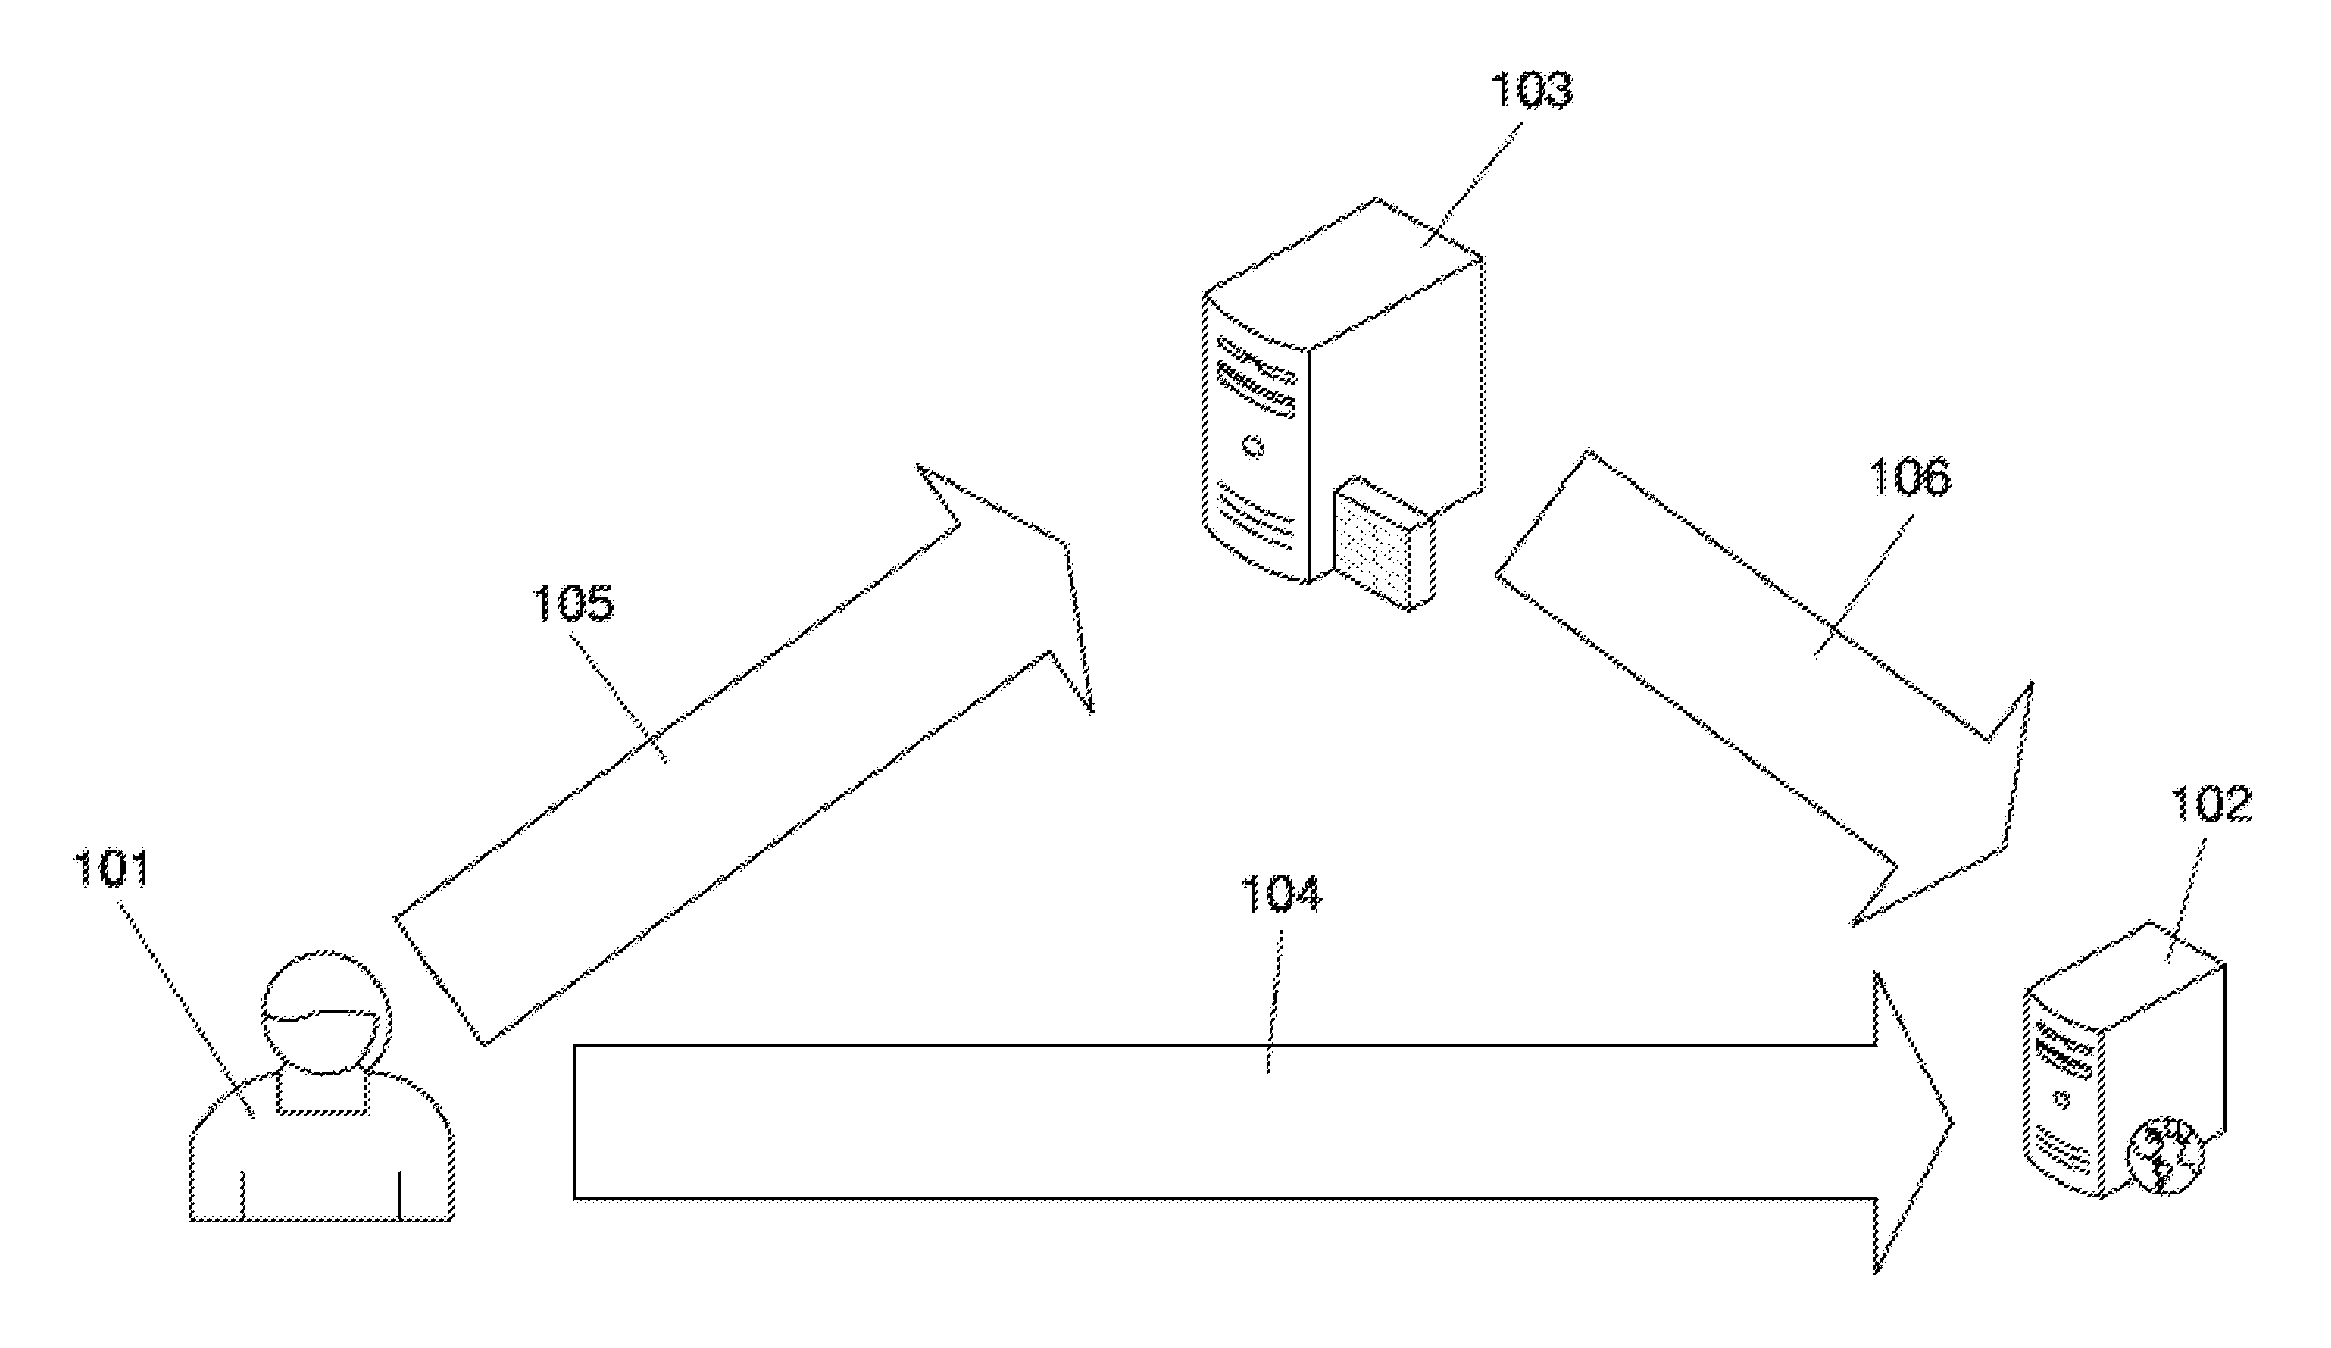 System and method for generating trust among data network users